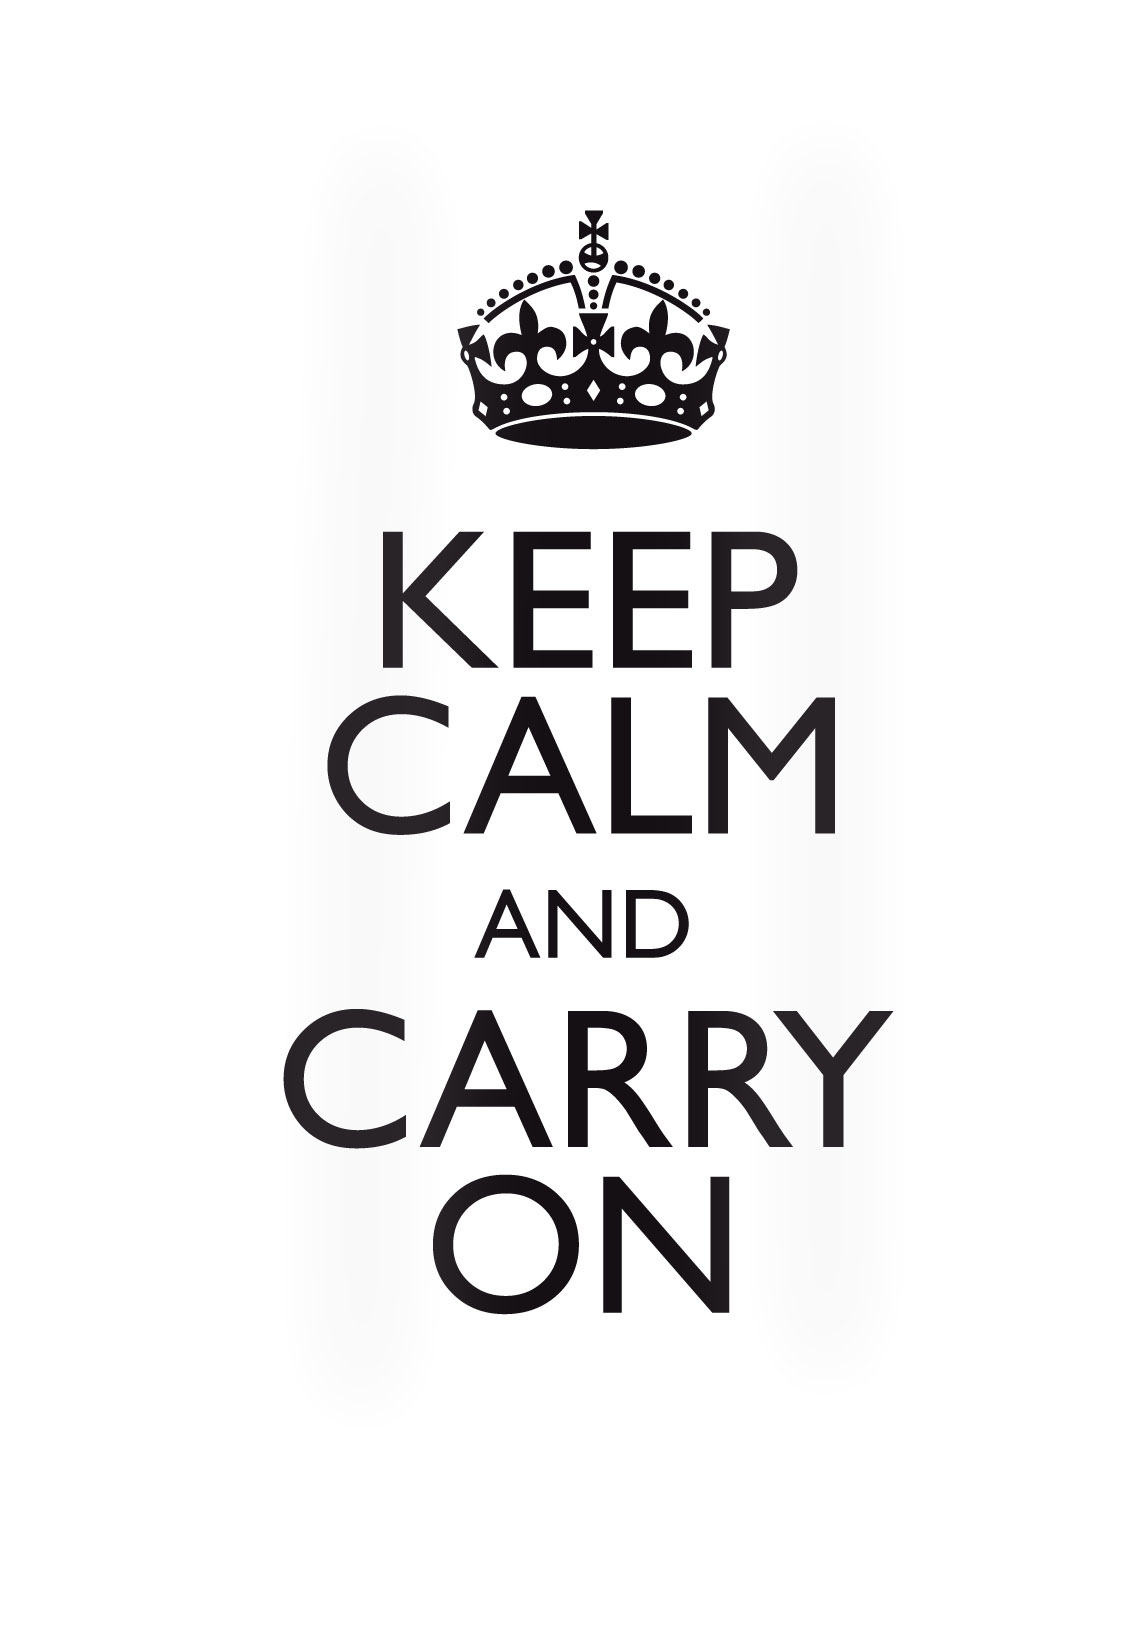 Keep Calm And Carry On clipart free image download